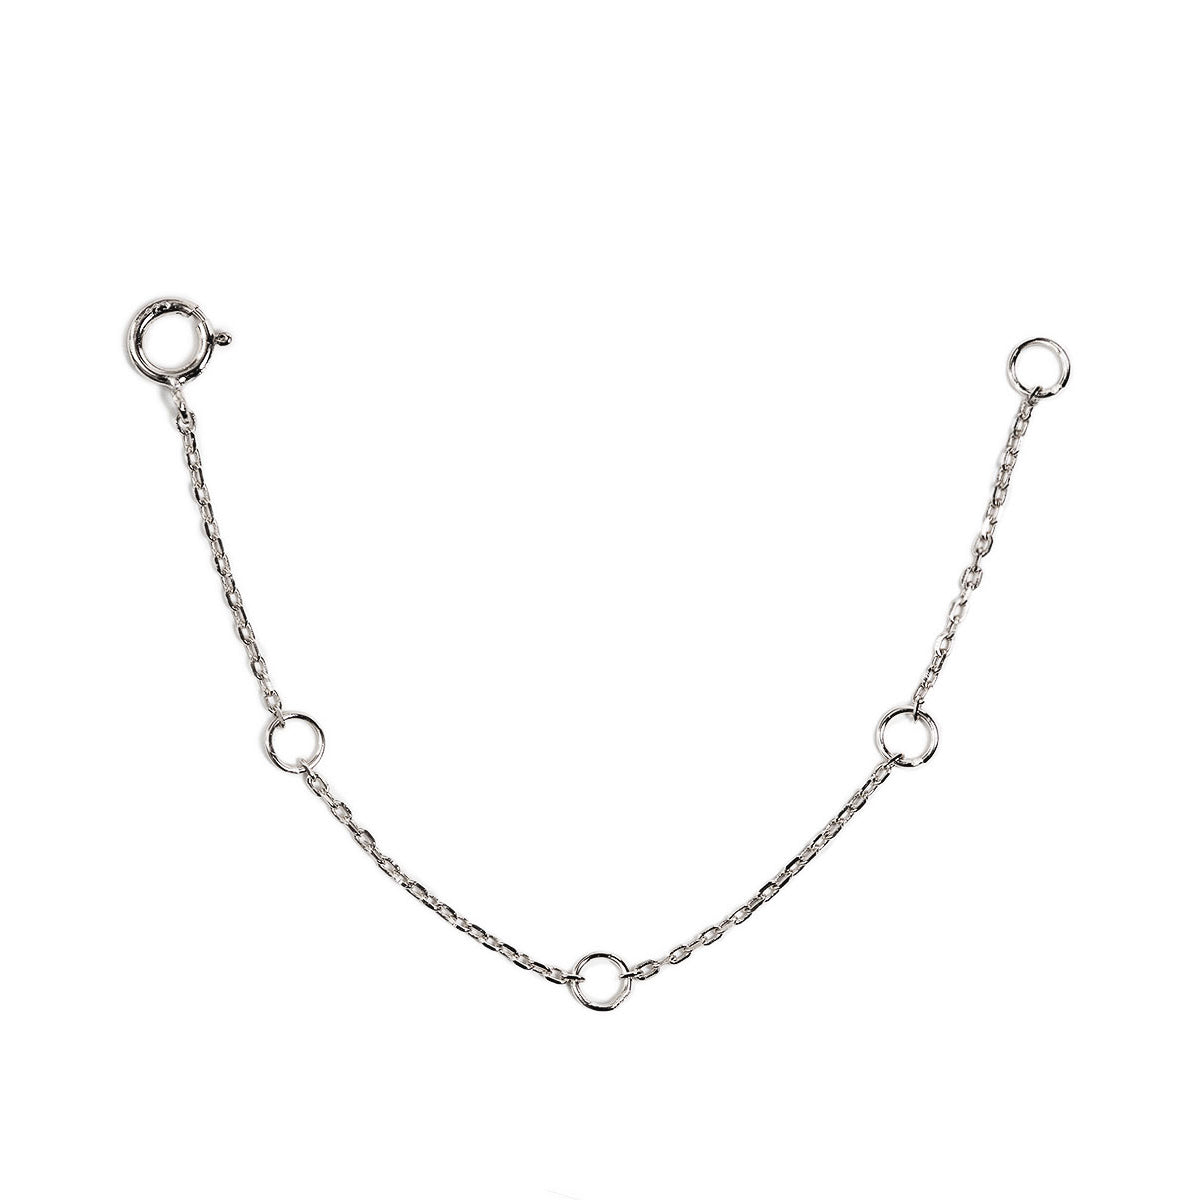 Body Chain or Necklace Extender, Jewelry Extension Sterling Silver